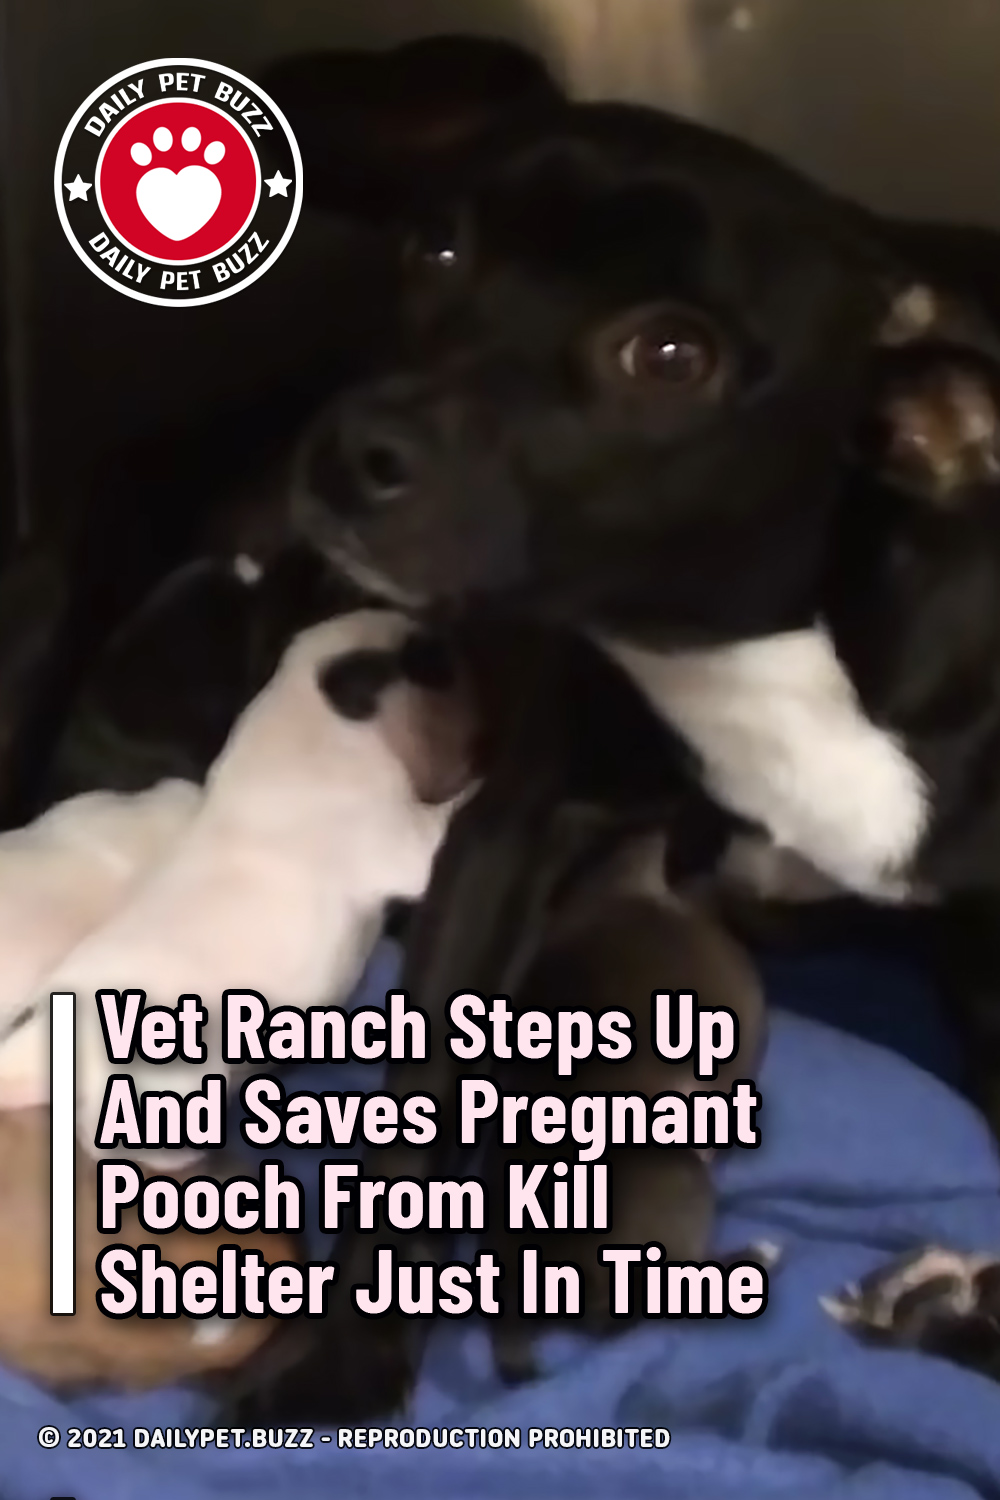 Vet Ranch Steps Up And Saves Pregnant Pooch From Kill Shelter Just In Time